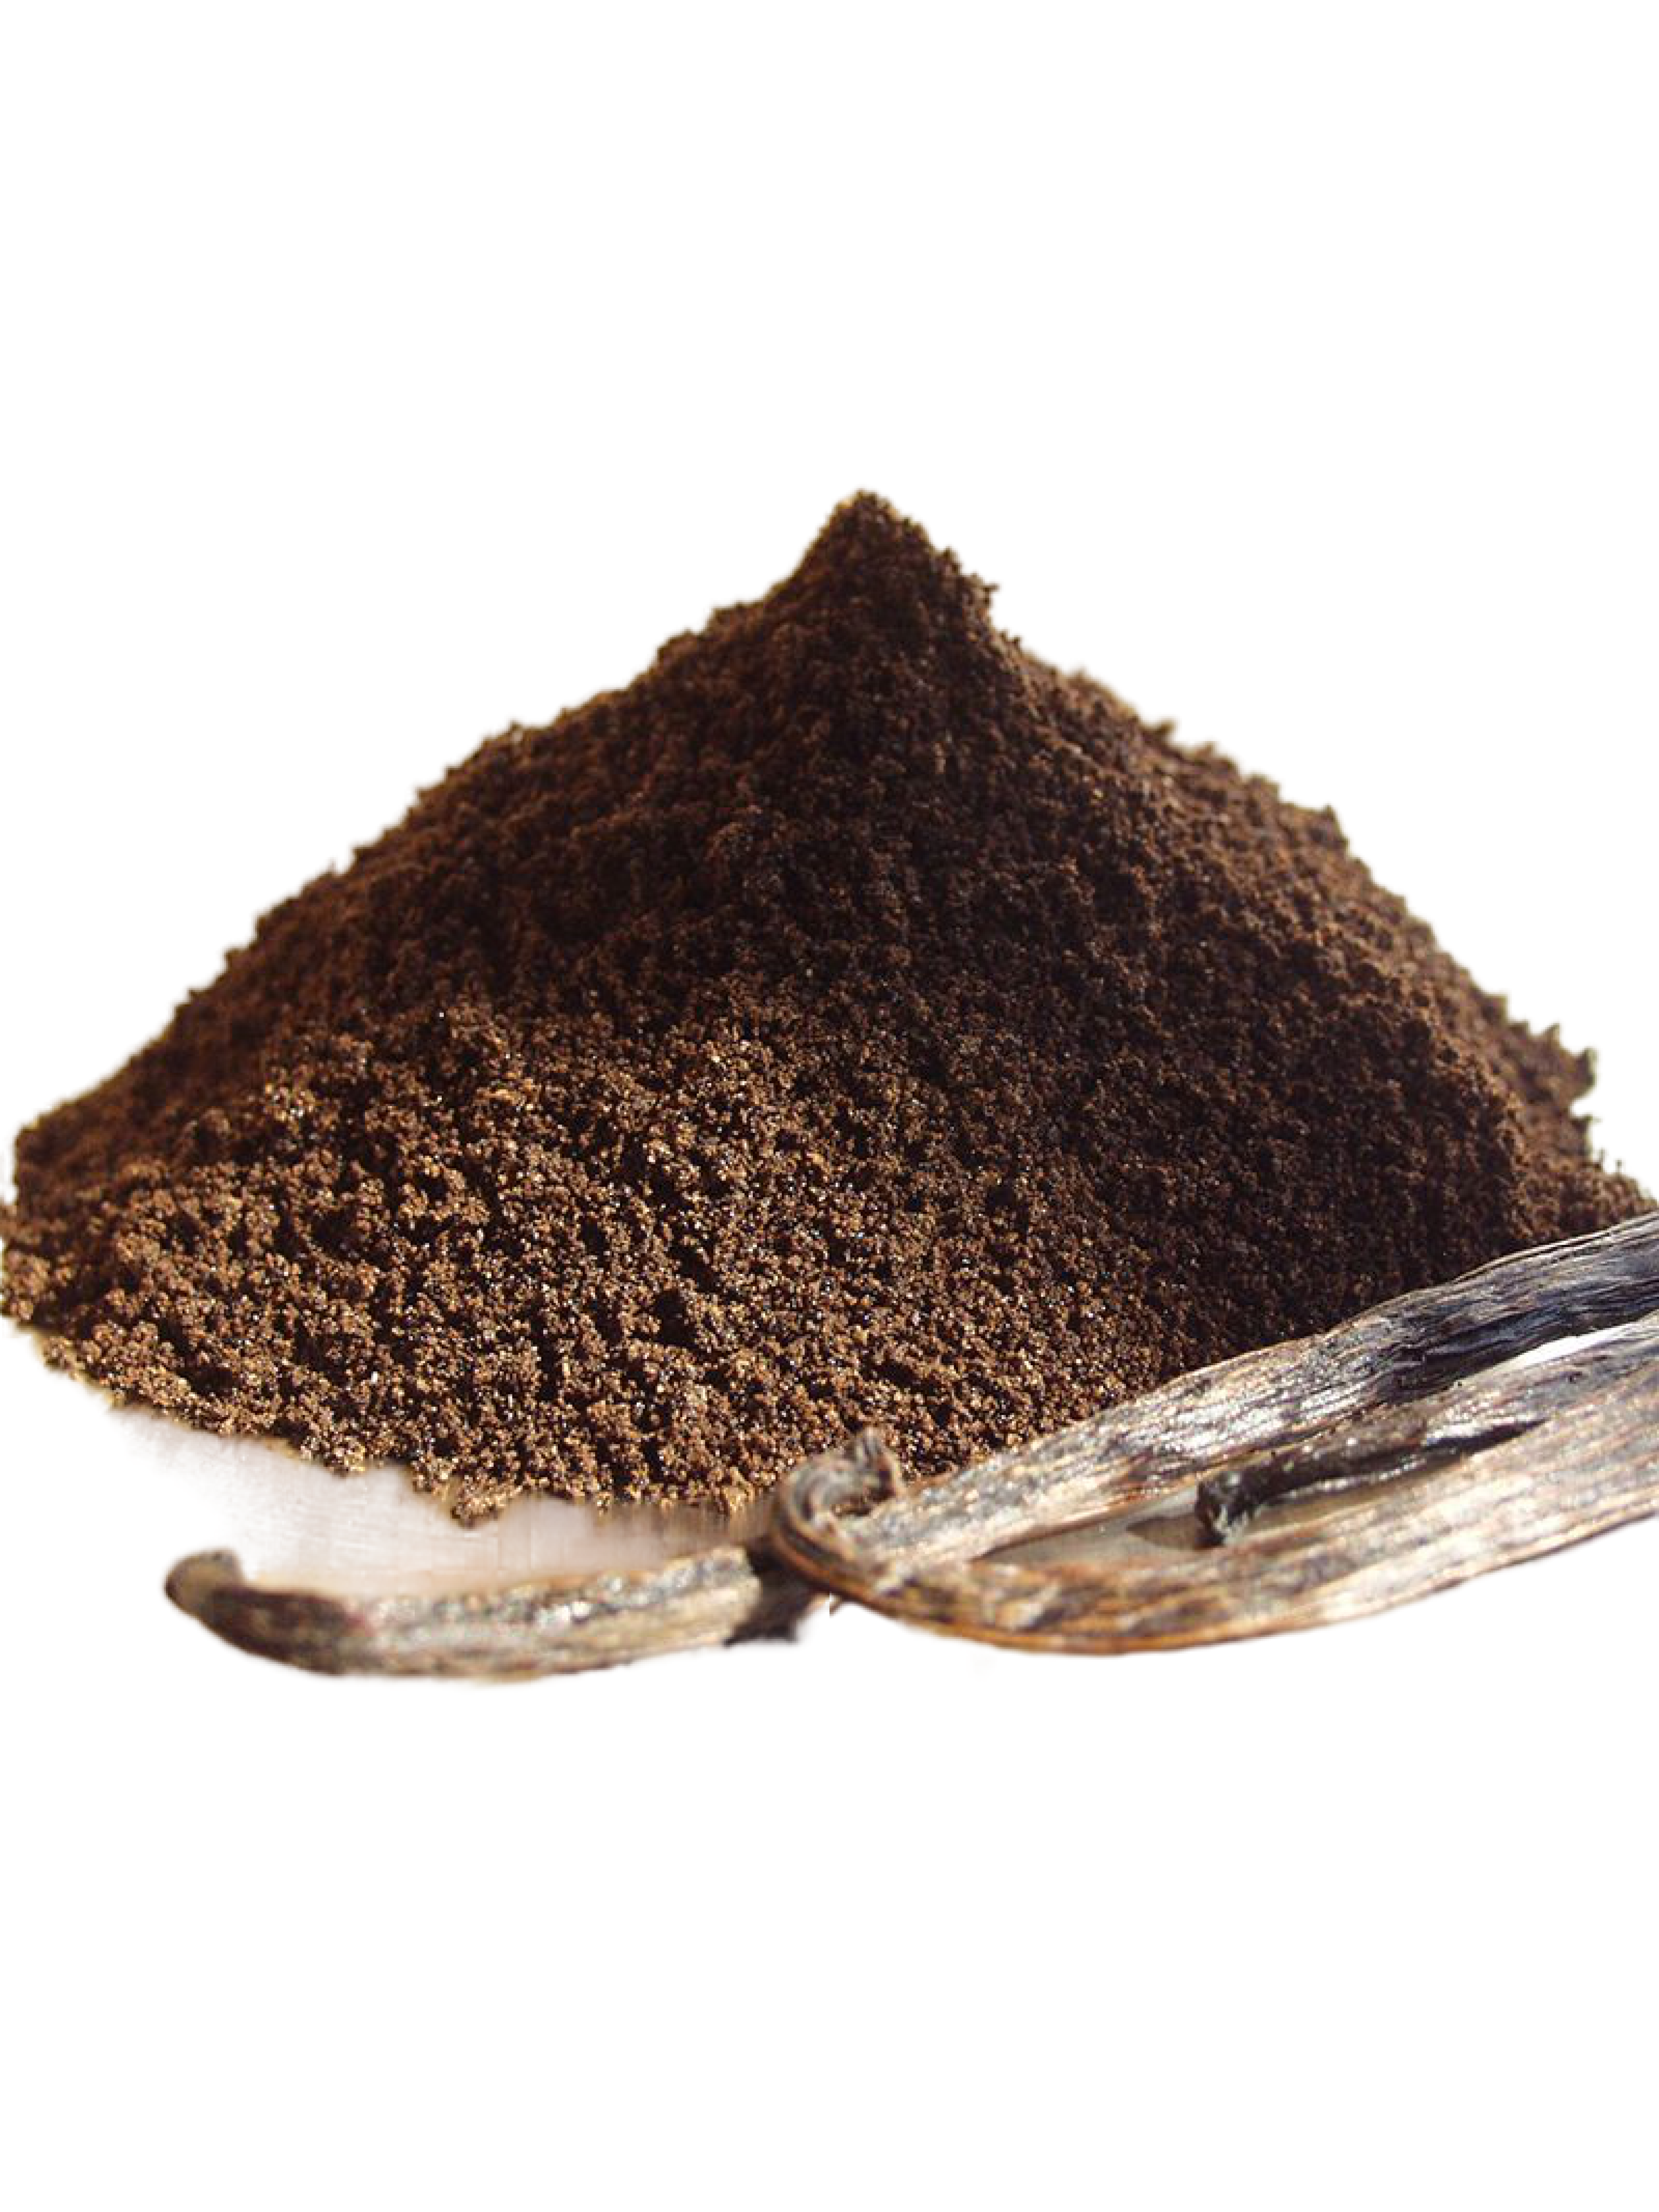 Co-op Pricing Tahitian Ground Vanilla Bean Powder  (CAD 11 Per Ounce)<br><br>Minimum Order quantity for this Co-op is 2 ounces